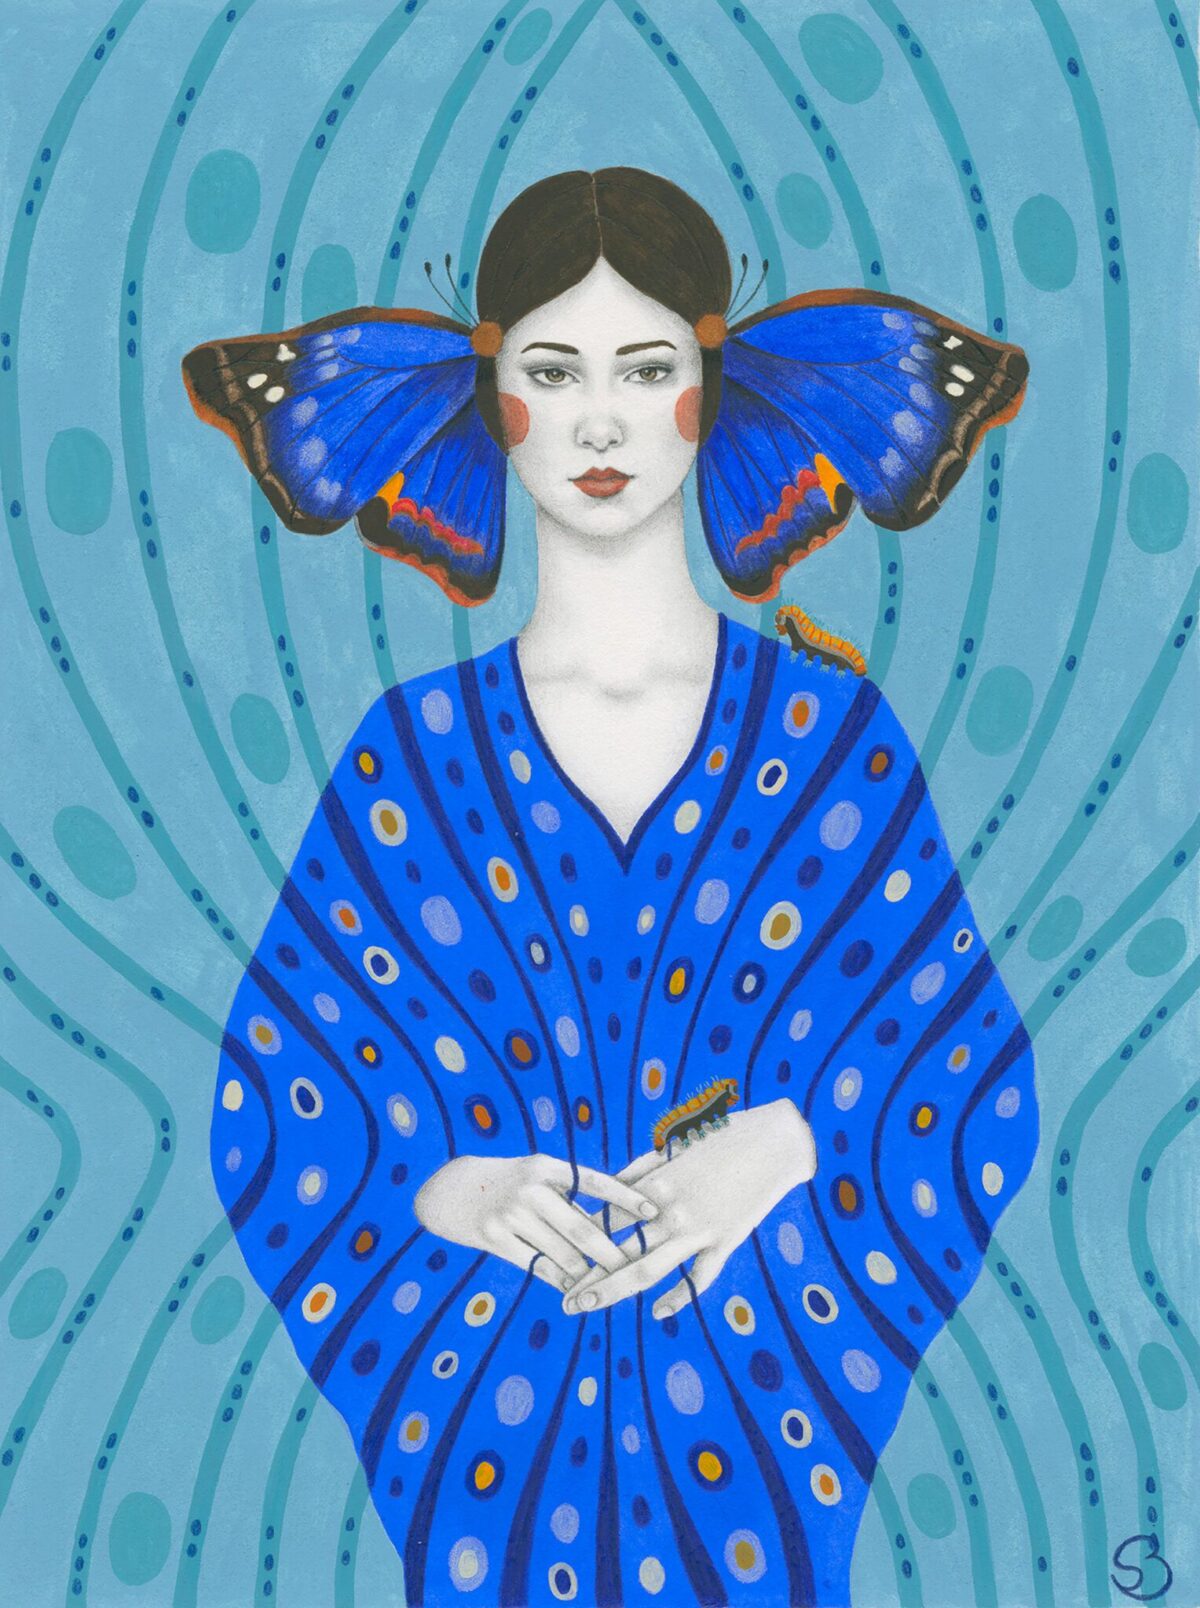 Gorgeous Female Portraits Decorated With Abstract And Floral Patterns By Sofia Bonati 14